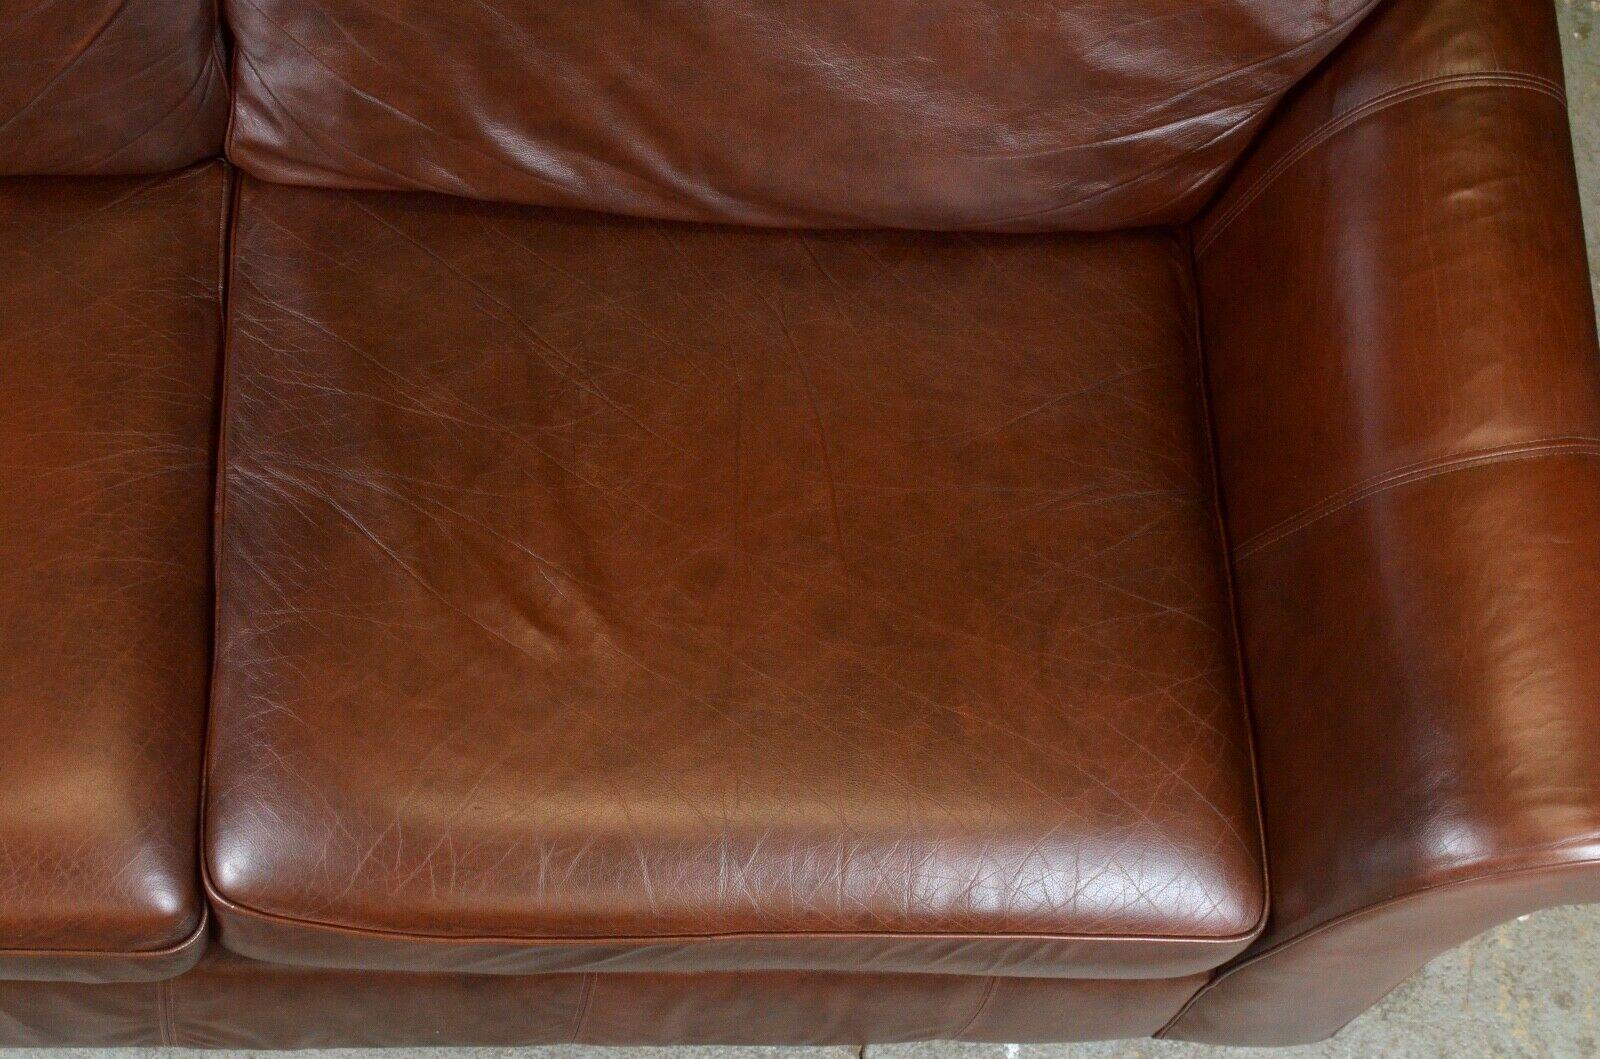 English British Marks & Spencer Abbey 3 Seater Brown Leather Sofa / Armchair Available